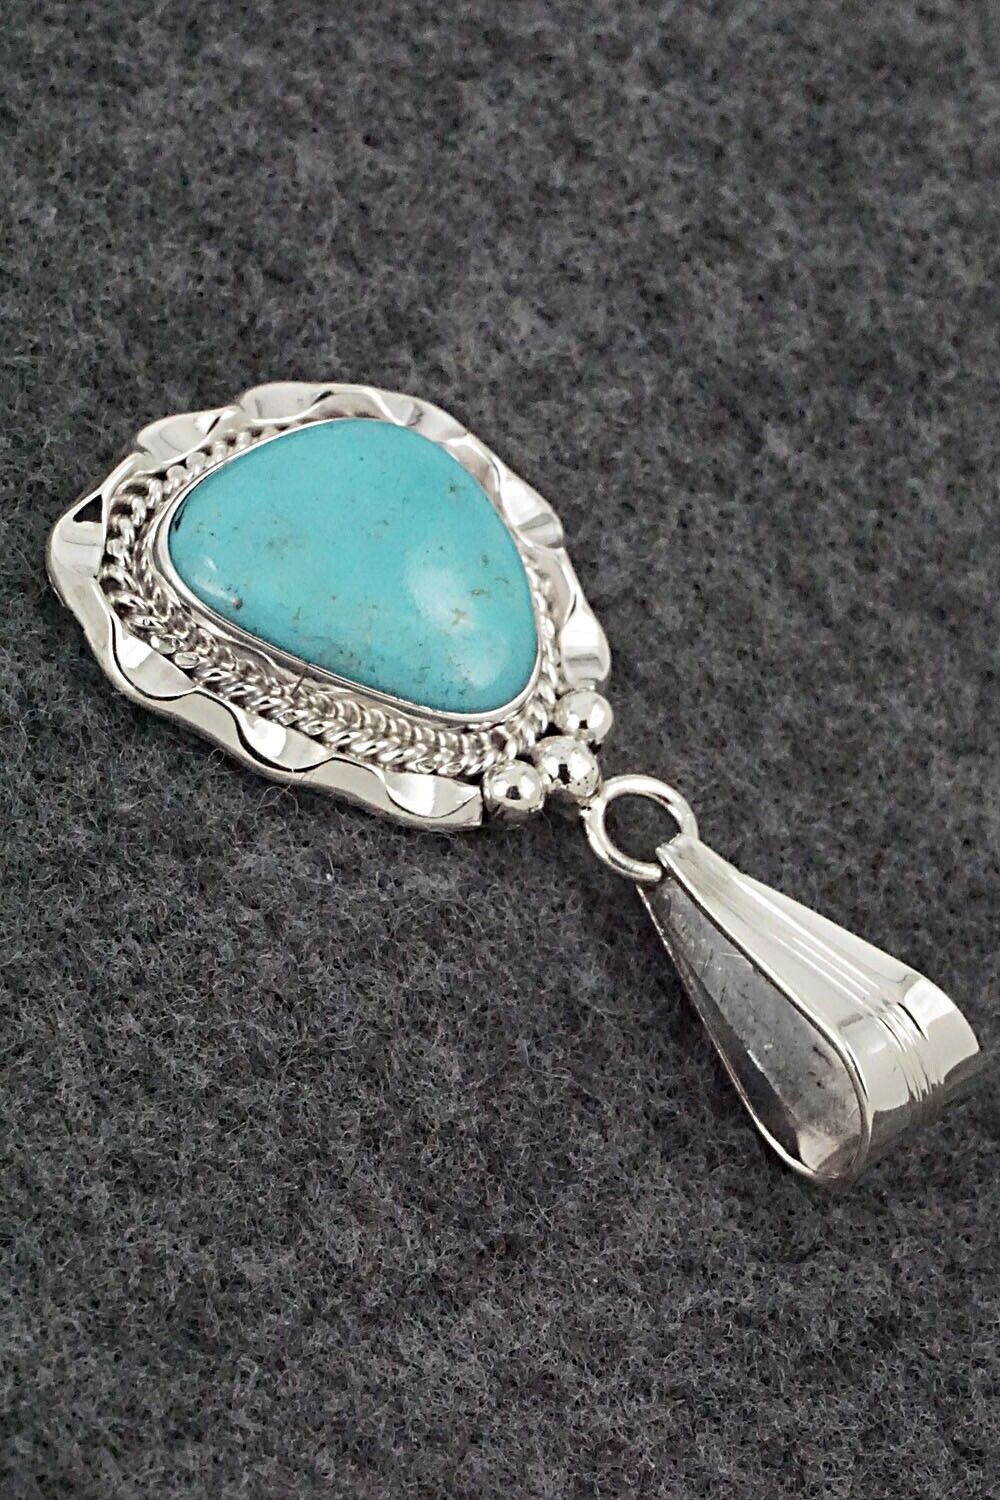 Turquoise & Sterling Silver Pendant - Samuel Yellowhair